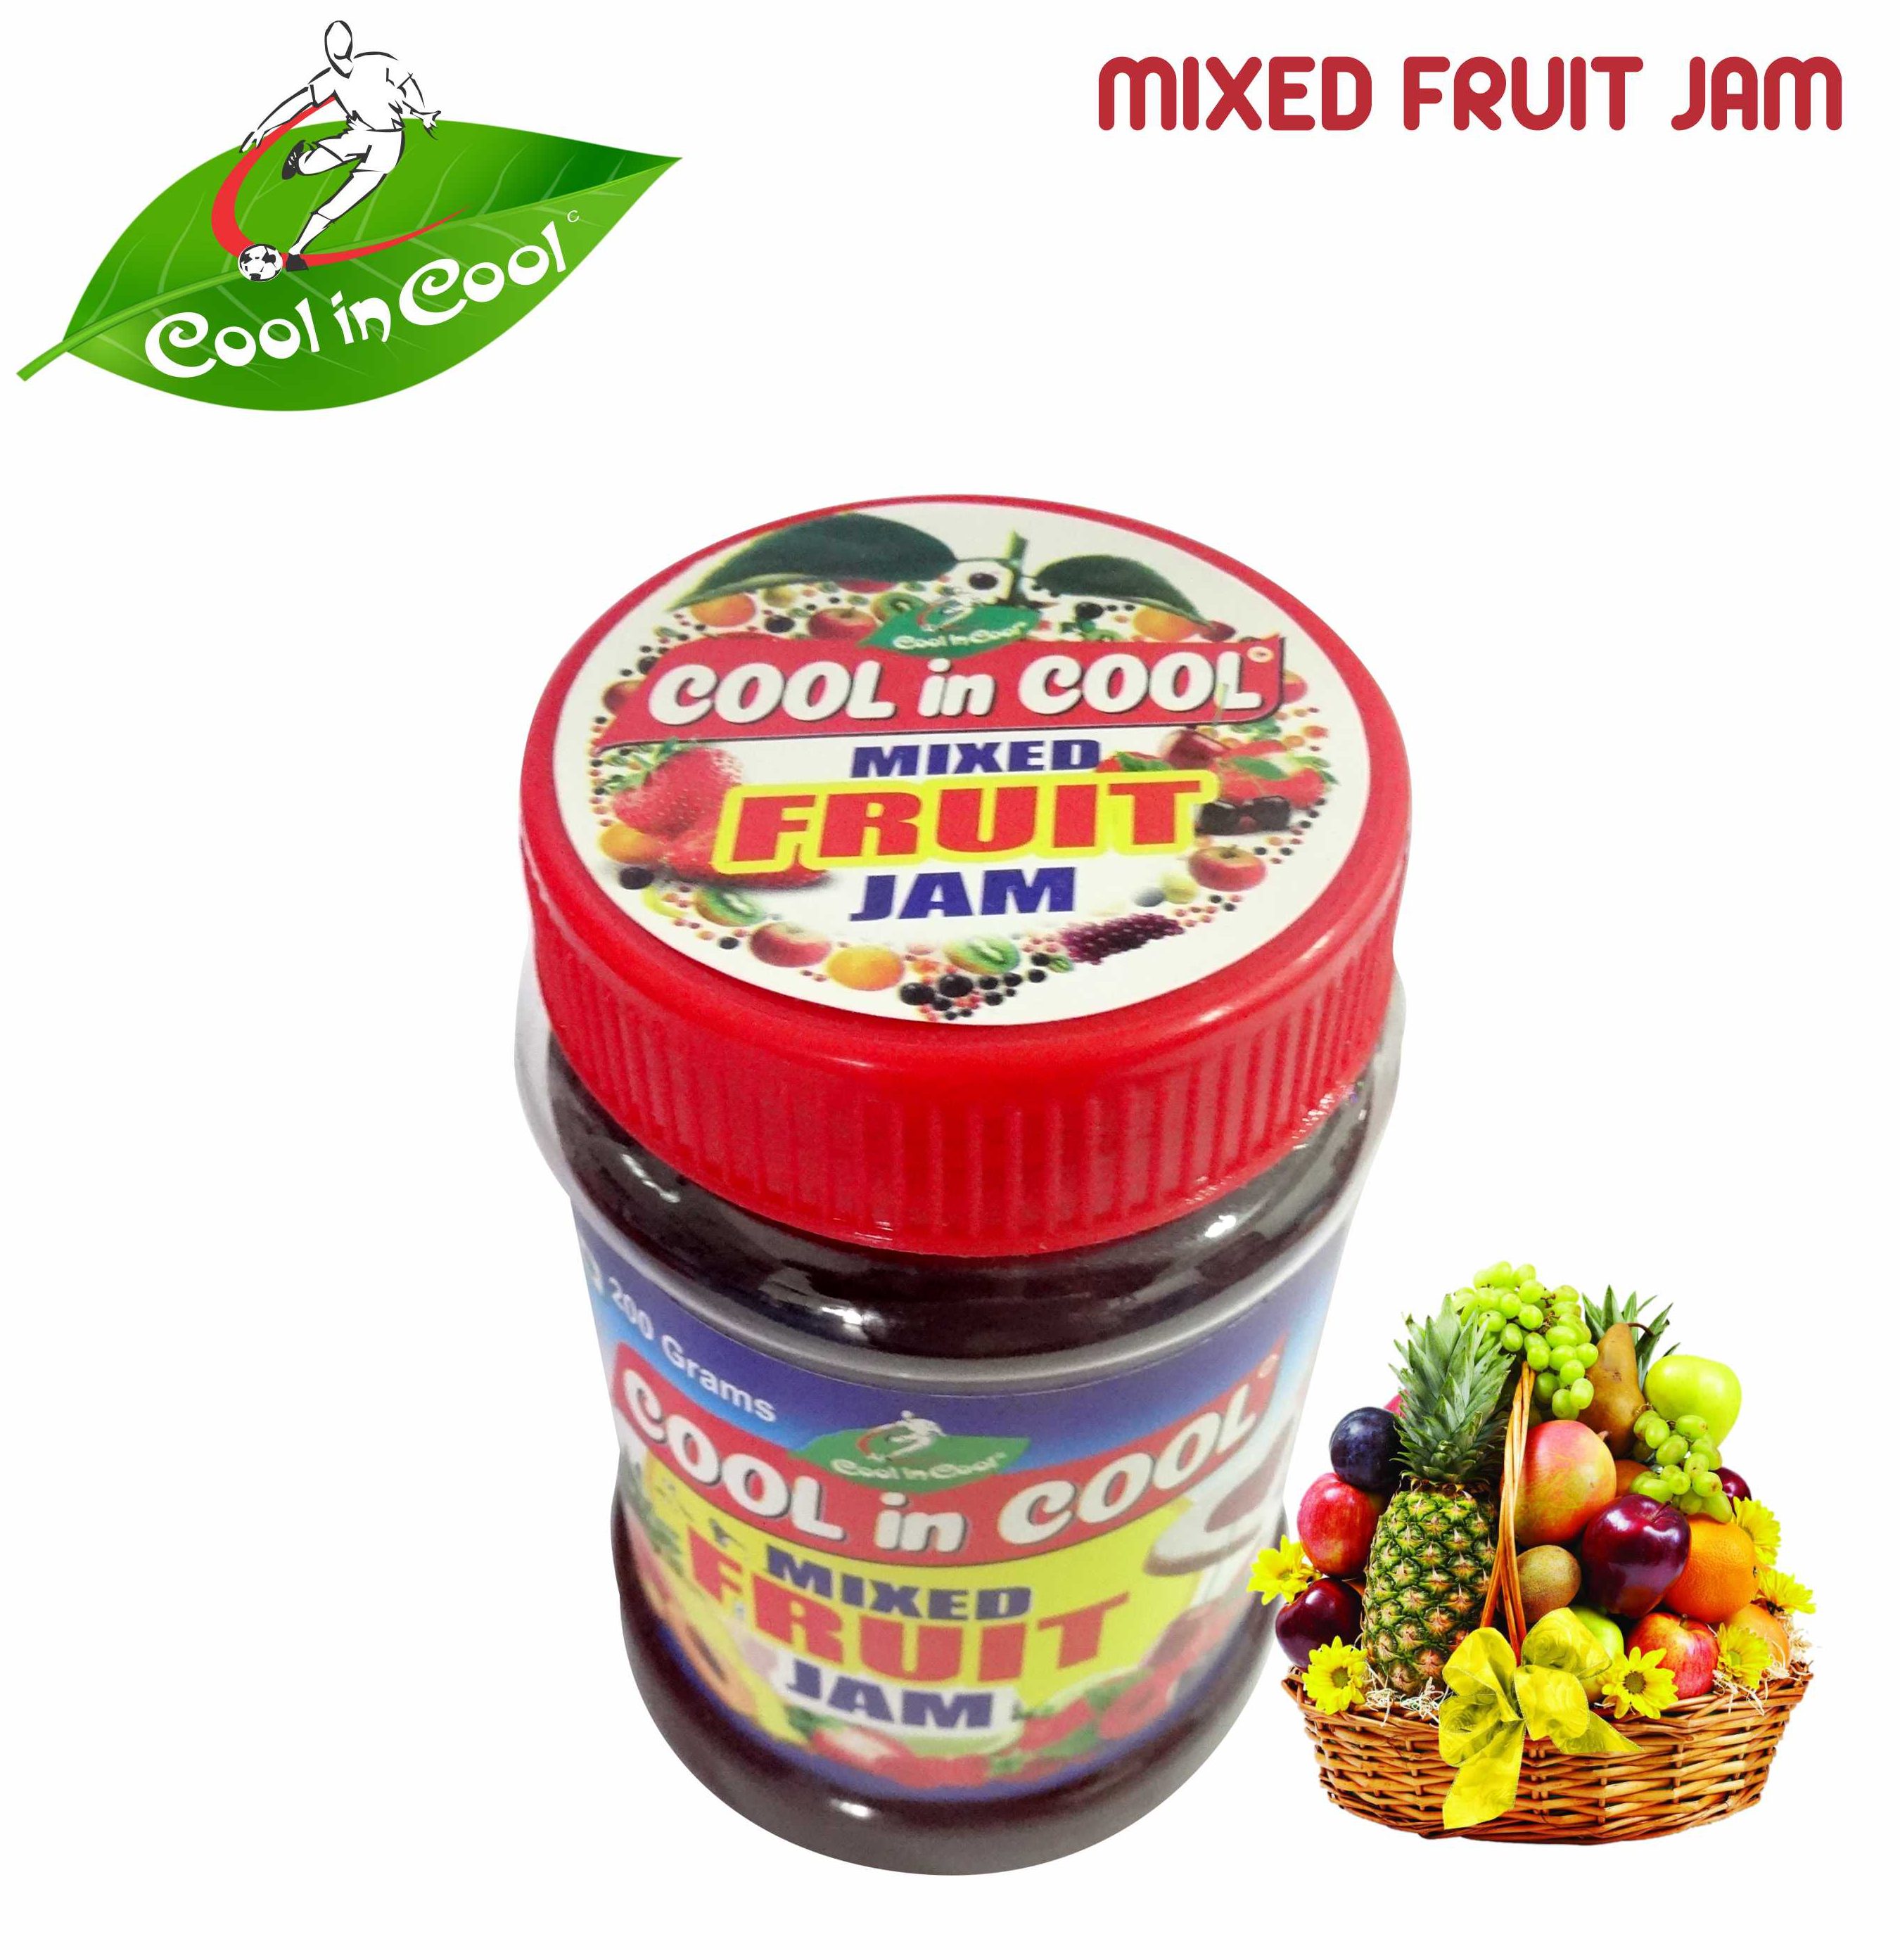 Mixed Fruit Jam - Cool in Cool Masala - Best Masala Products Manufacturer  Tamil Nadu, India